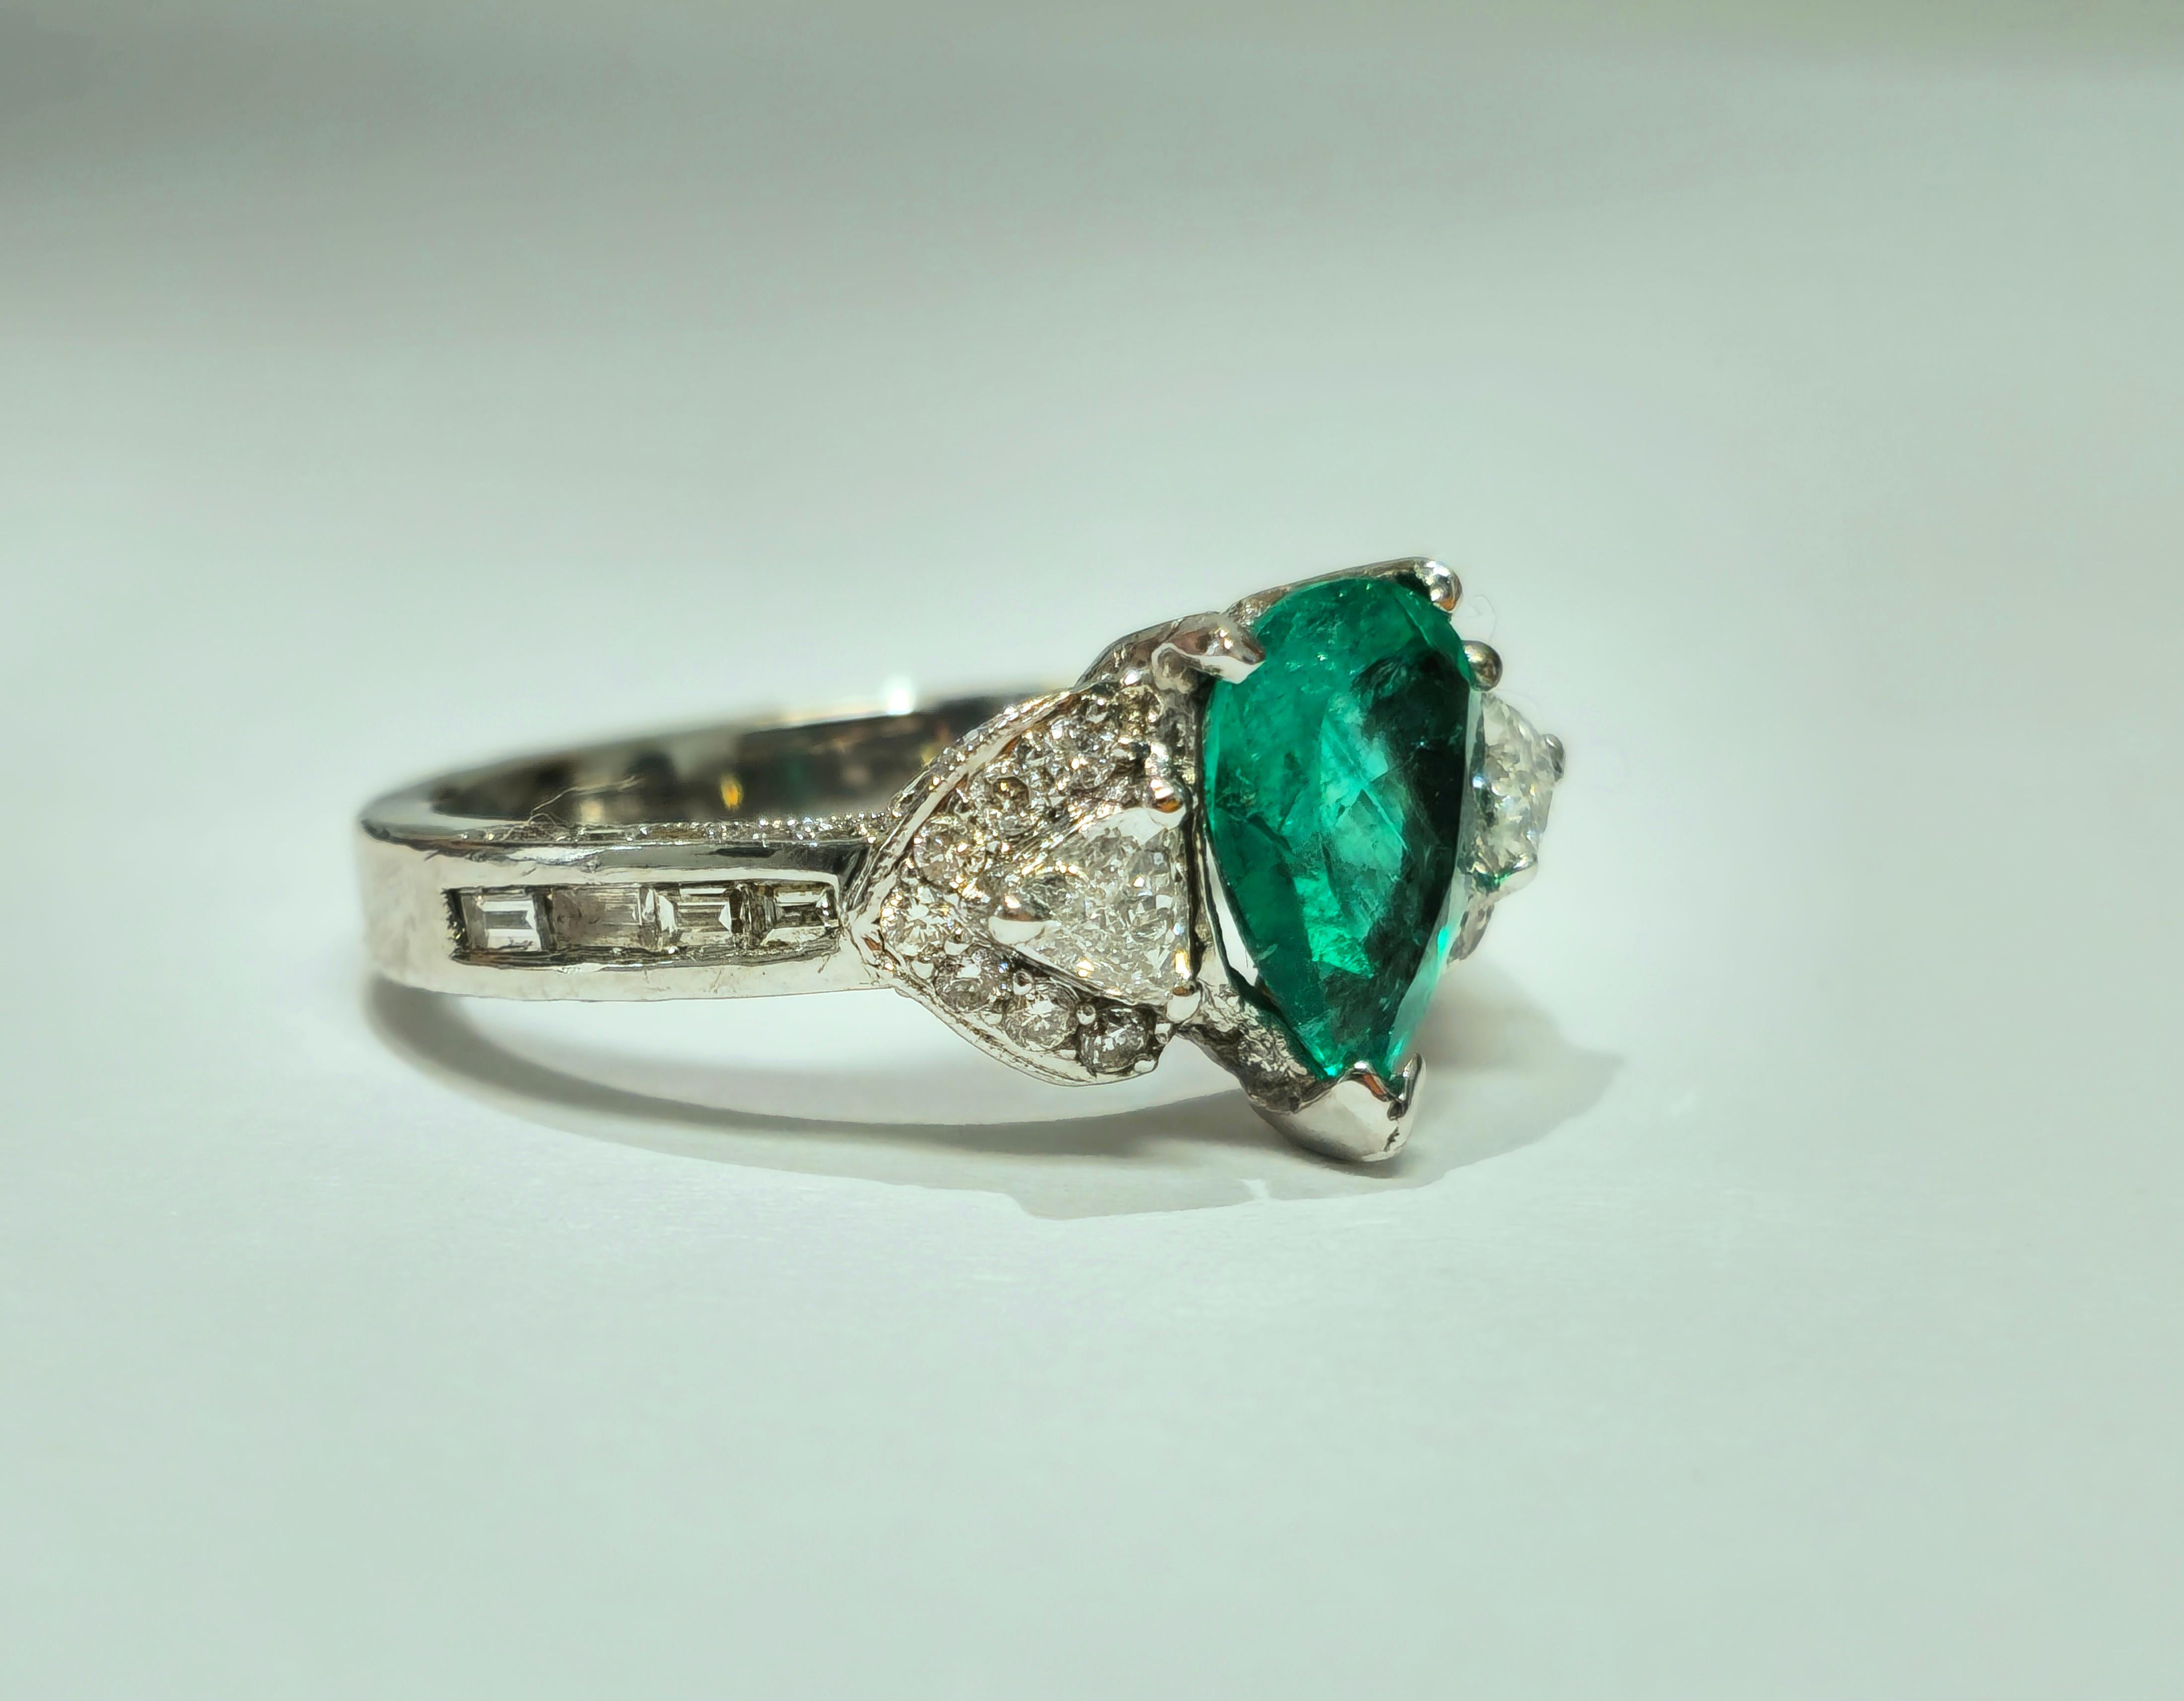 Intricately crafted in 18K white gold, this exquisite vintage ring features a stunning 2.50 carat Colombian pear-shaped emerald, exuding natural elegance. Accentuating its allure are 1.00 carat trillion-cut diamonds, adding a touch of sophistication